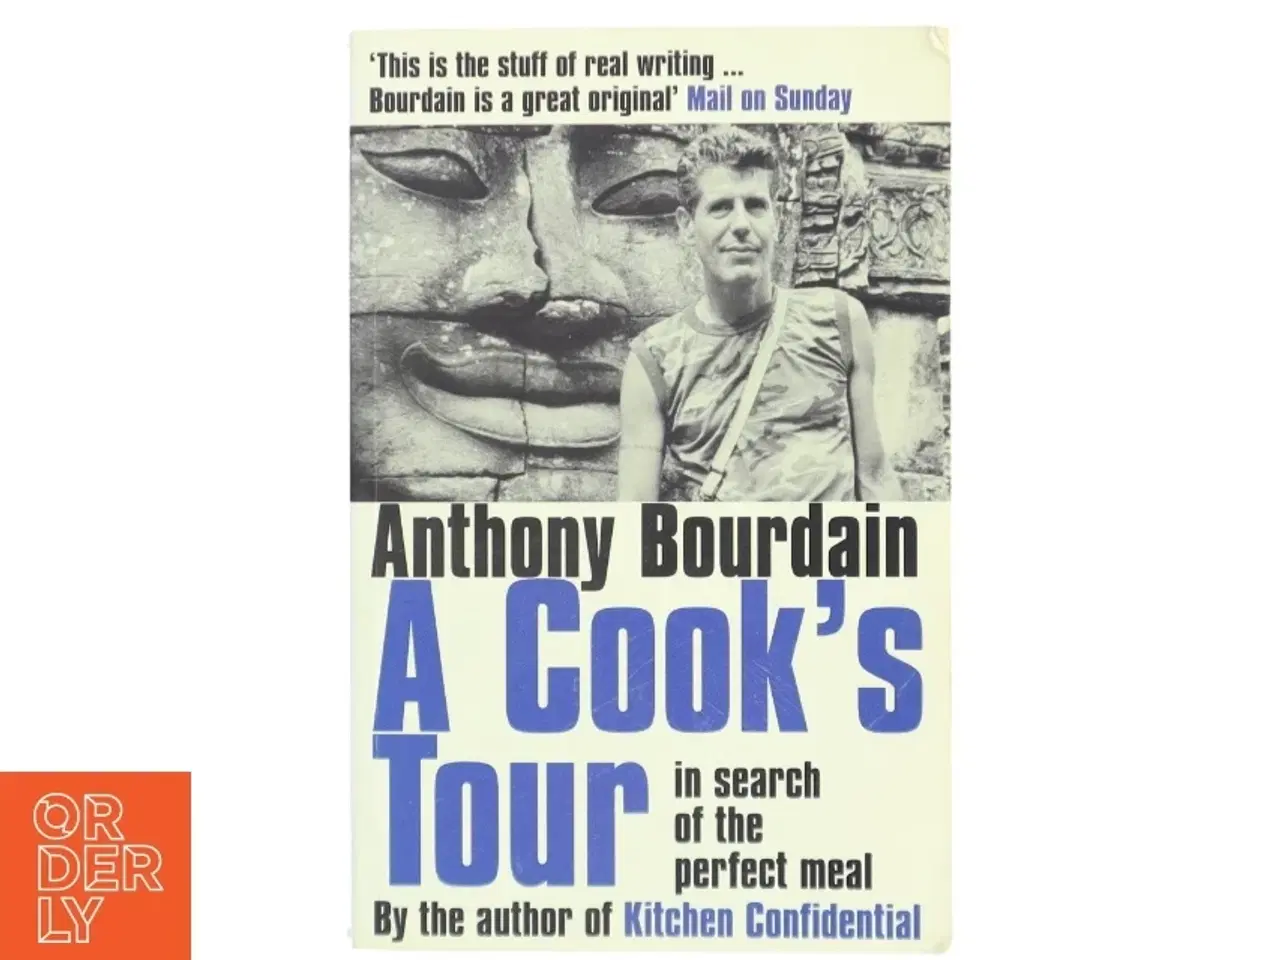 Billede 1 - A cook's tour : in search of the perfect meal af Anthony Bourdain (Bog)